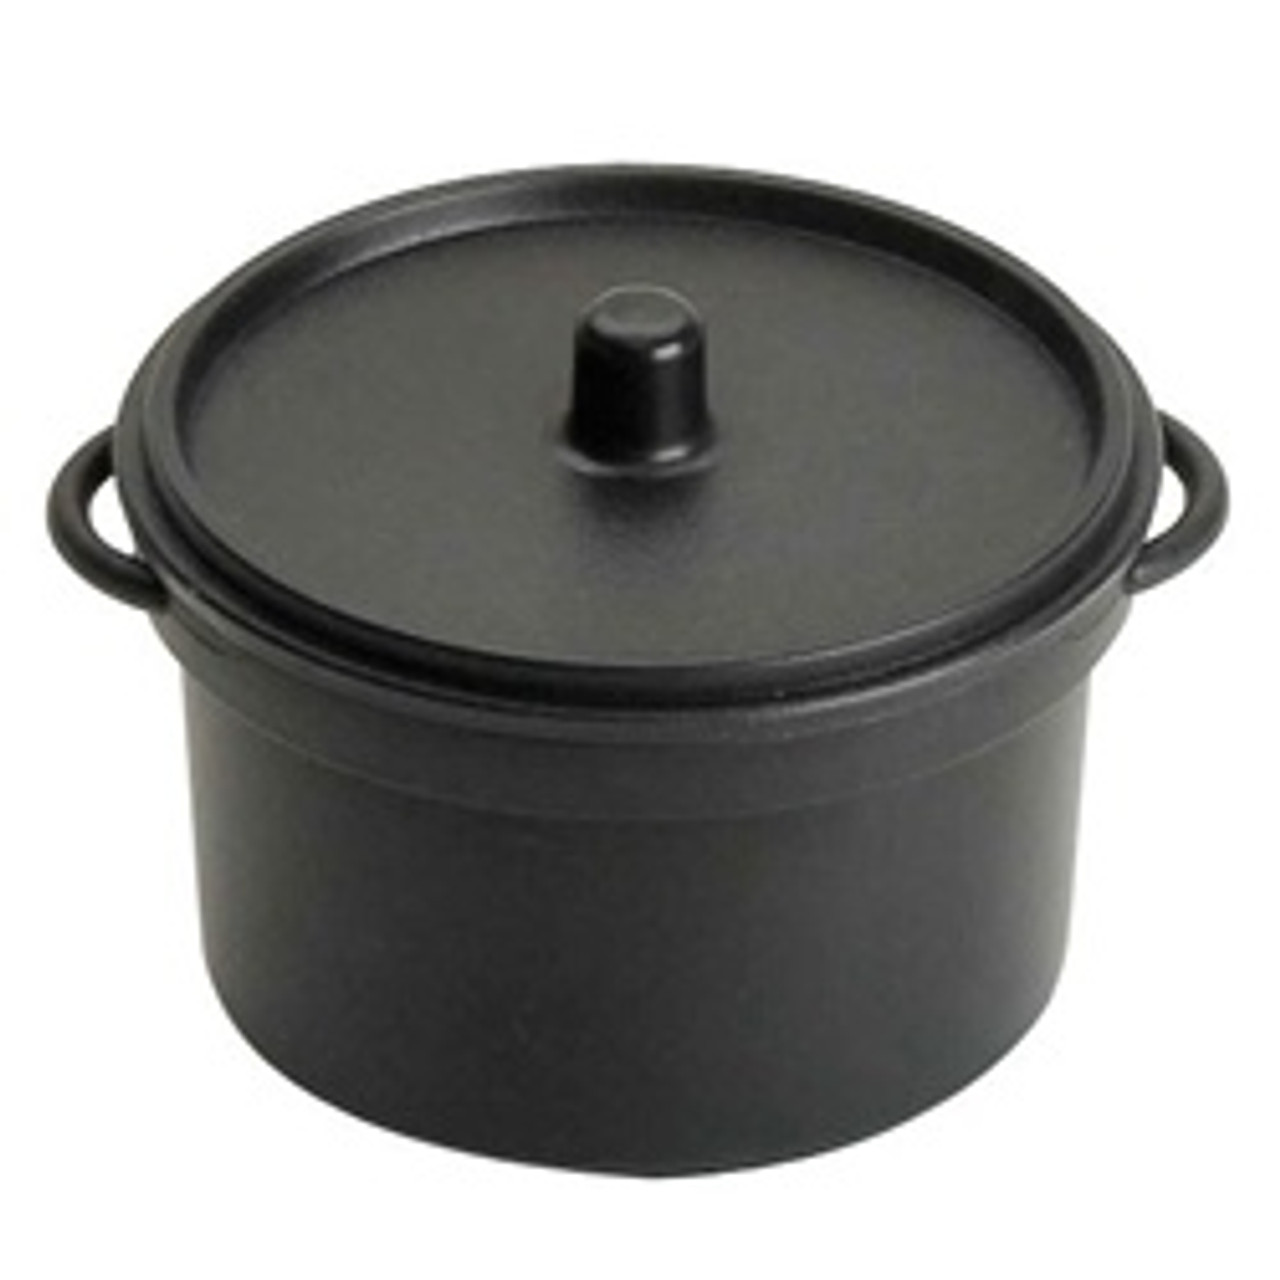 https://cdn11.bigcommerce.com/s-hgqmwywp99/images/stencil/1280x1280/products/51565/46343/small-wonder-black-micro-cooking-pot-15__56816.1675880464.jpg?c=1?imbypass=on